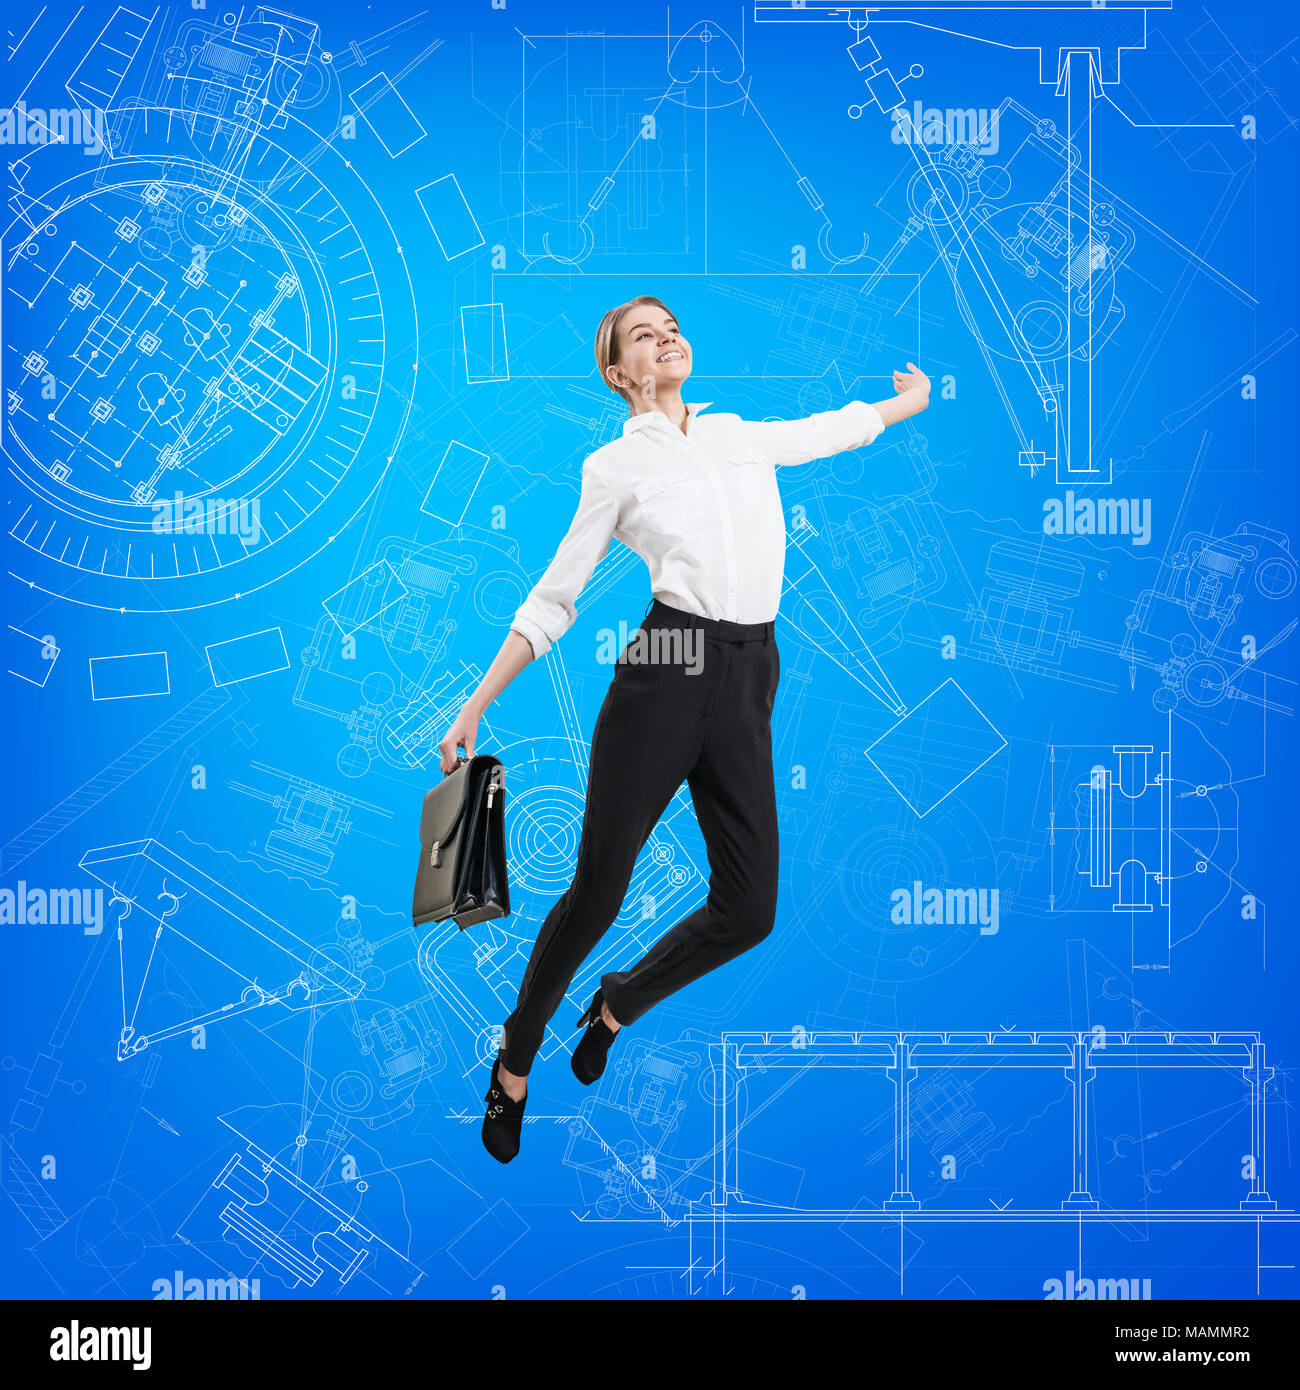 Business woman jumping over blueprint background. Stock Photo